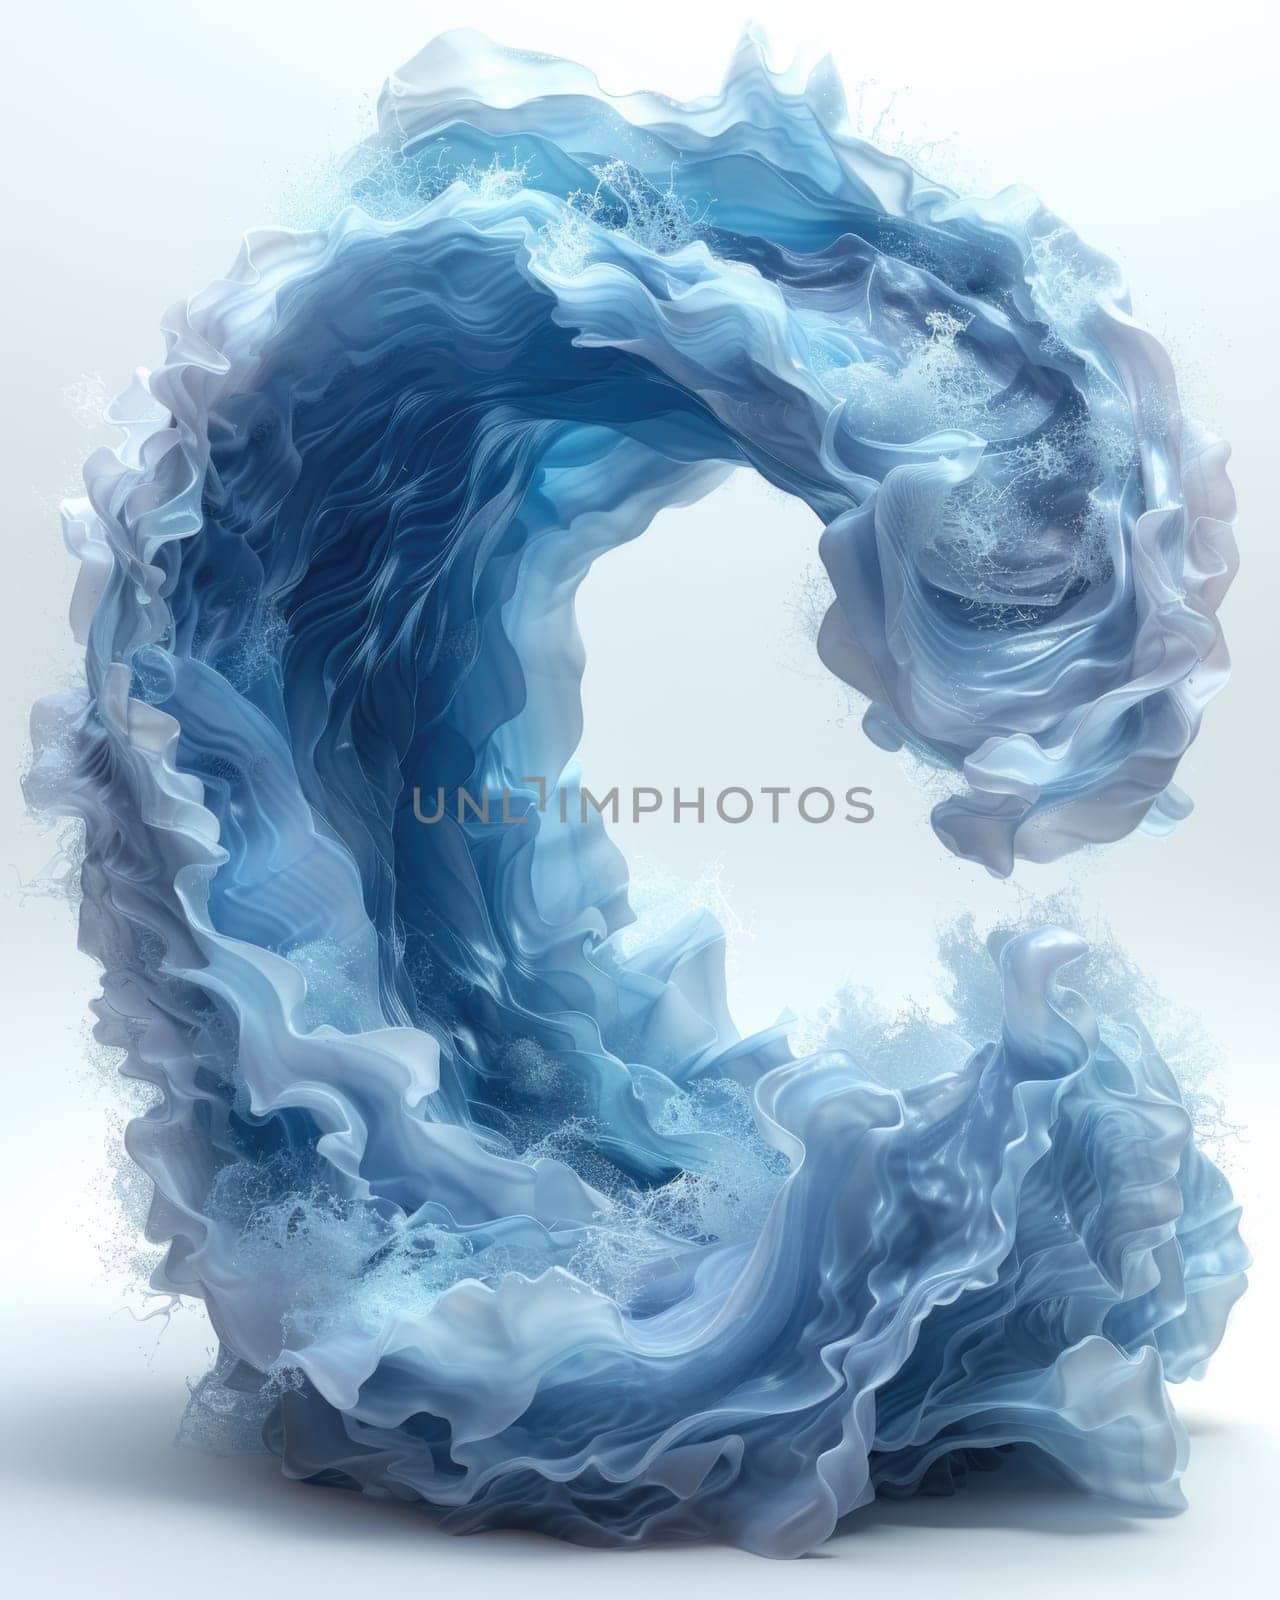 A visually striking letter formed by swirling patterns of blue and white on a background resembling the sea.